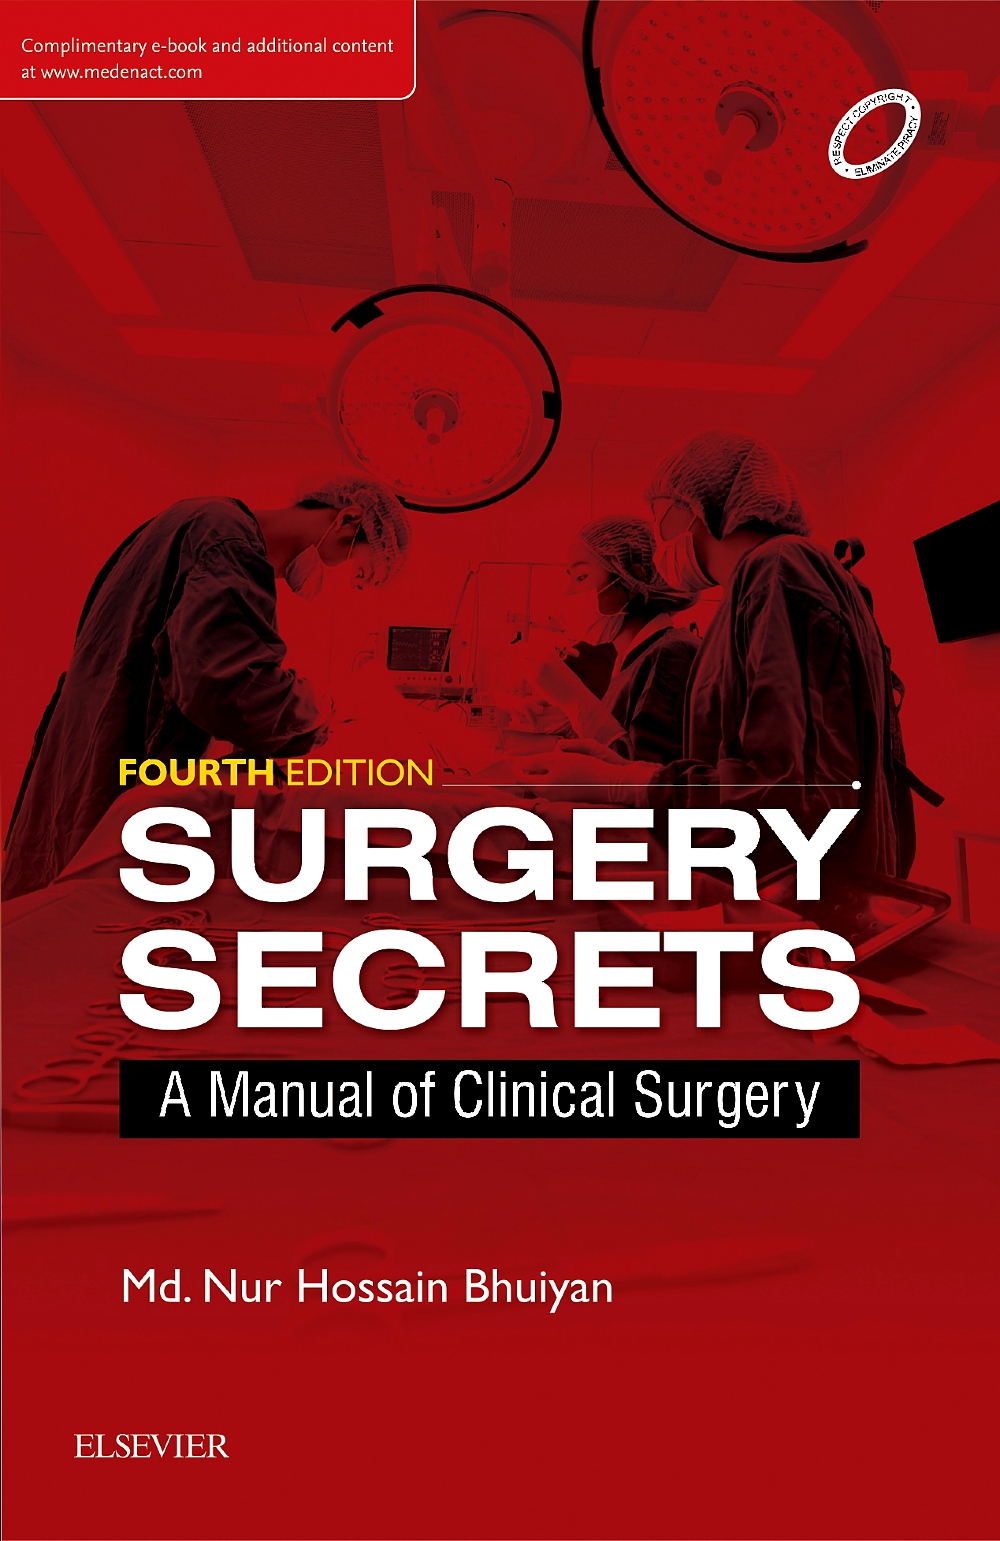 surgery-secrets-a-contrieve-for-learning-and-practicing-surgery-4e